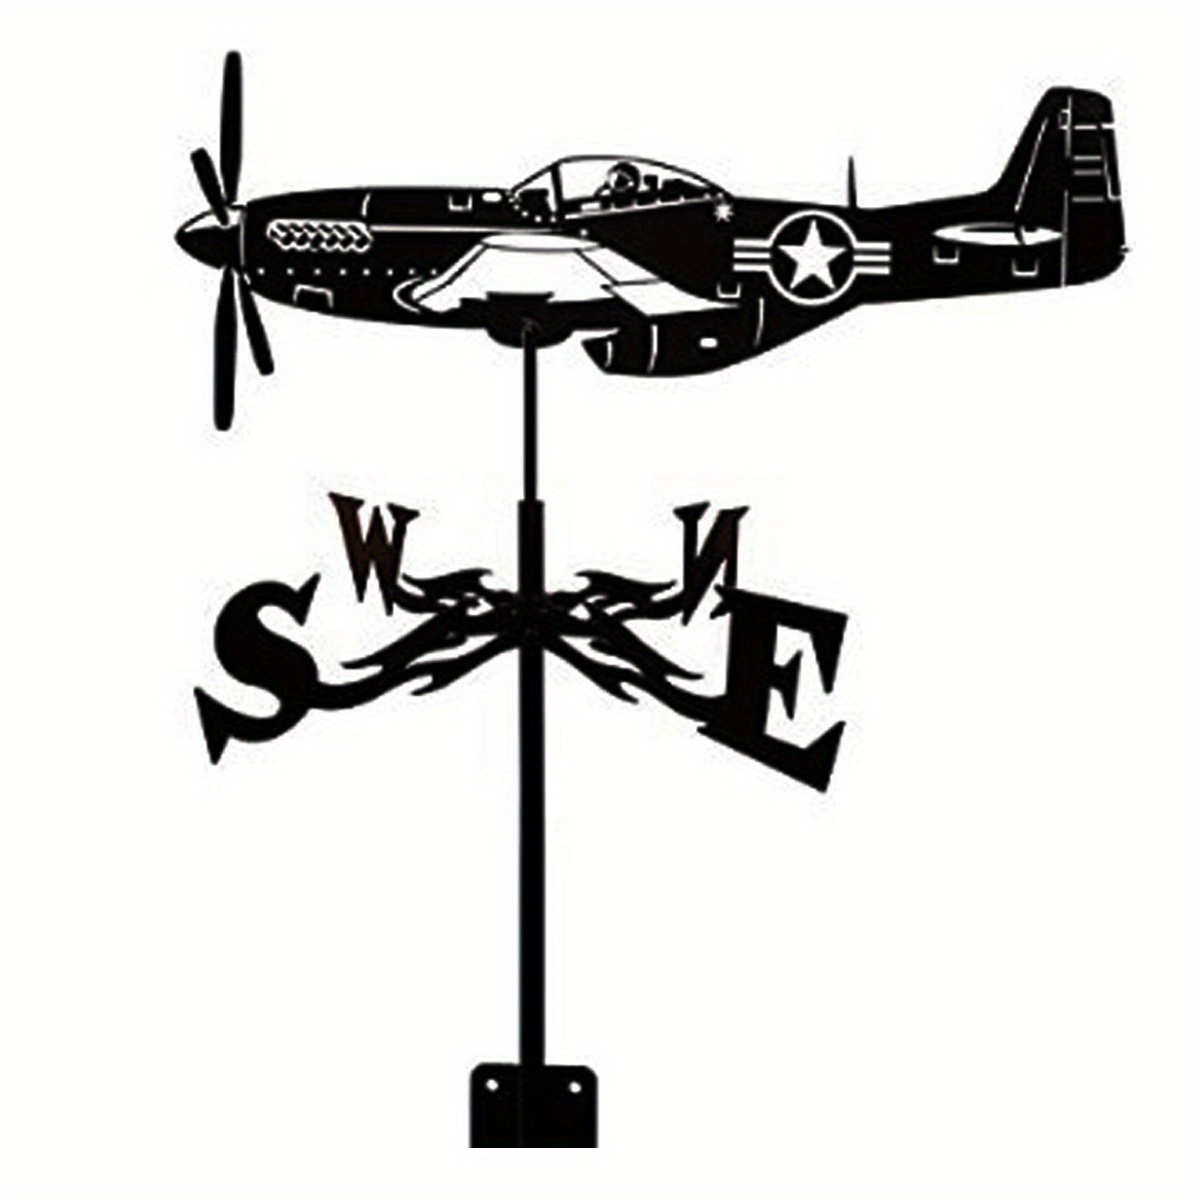 

1pc Airplane Weathervane Garden Weather Vane, For Roof Mount, Wind Direction Indicator, Stainless Steel Weathercock, For Farm Yard Home Decor Ornament